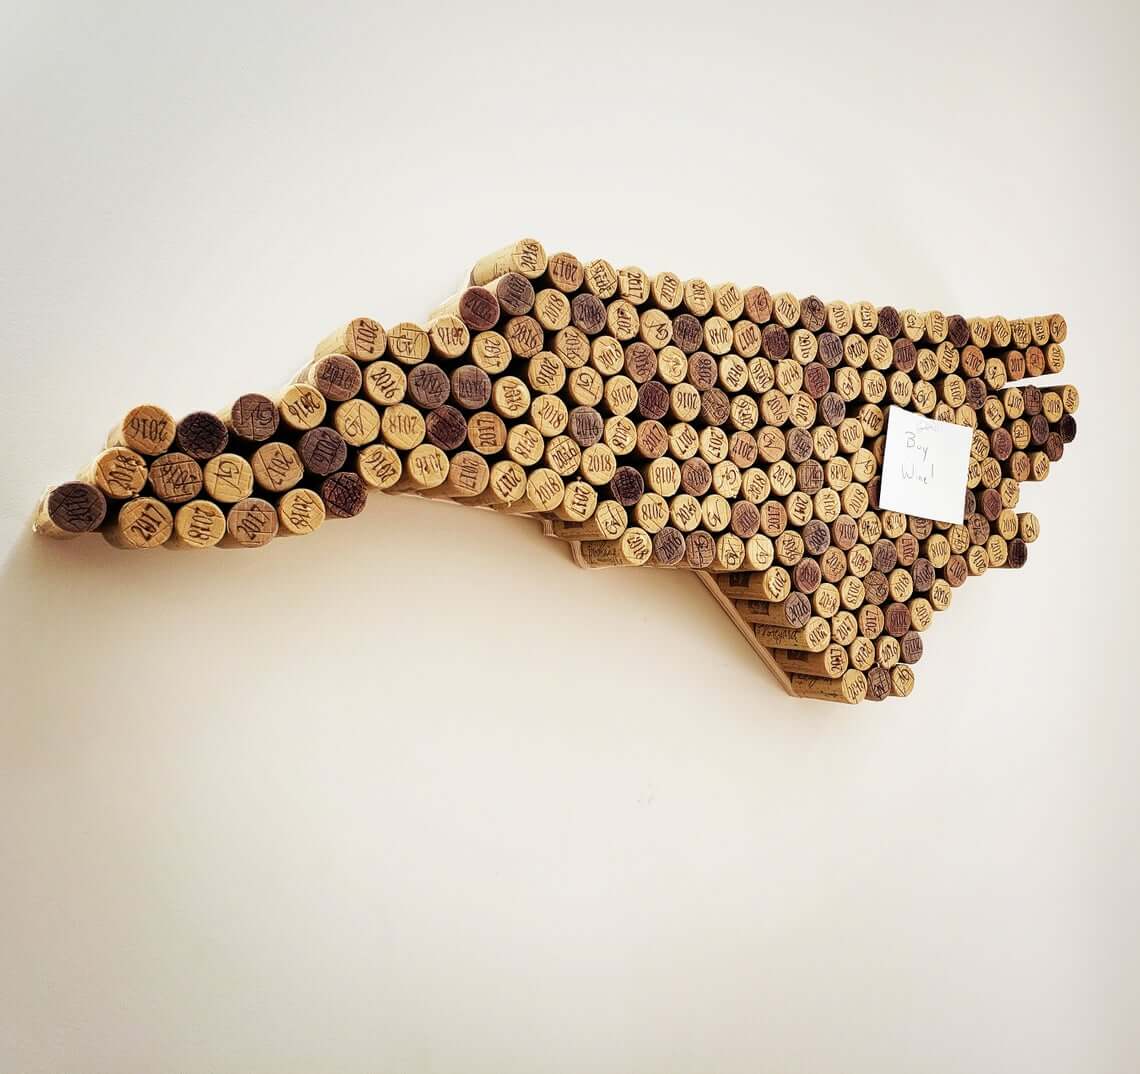 Upcycled State Design Cork Board